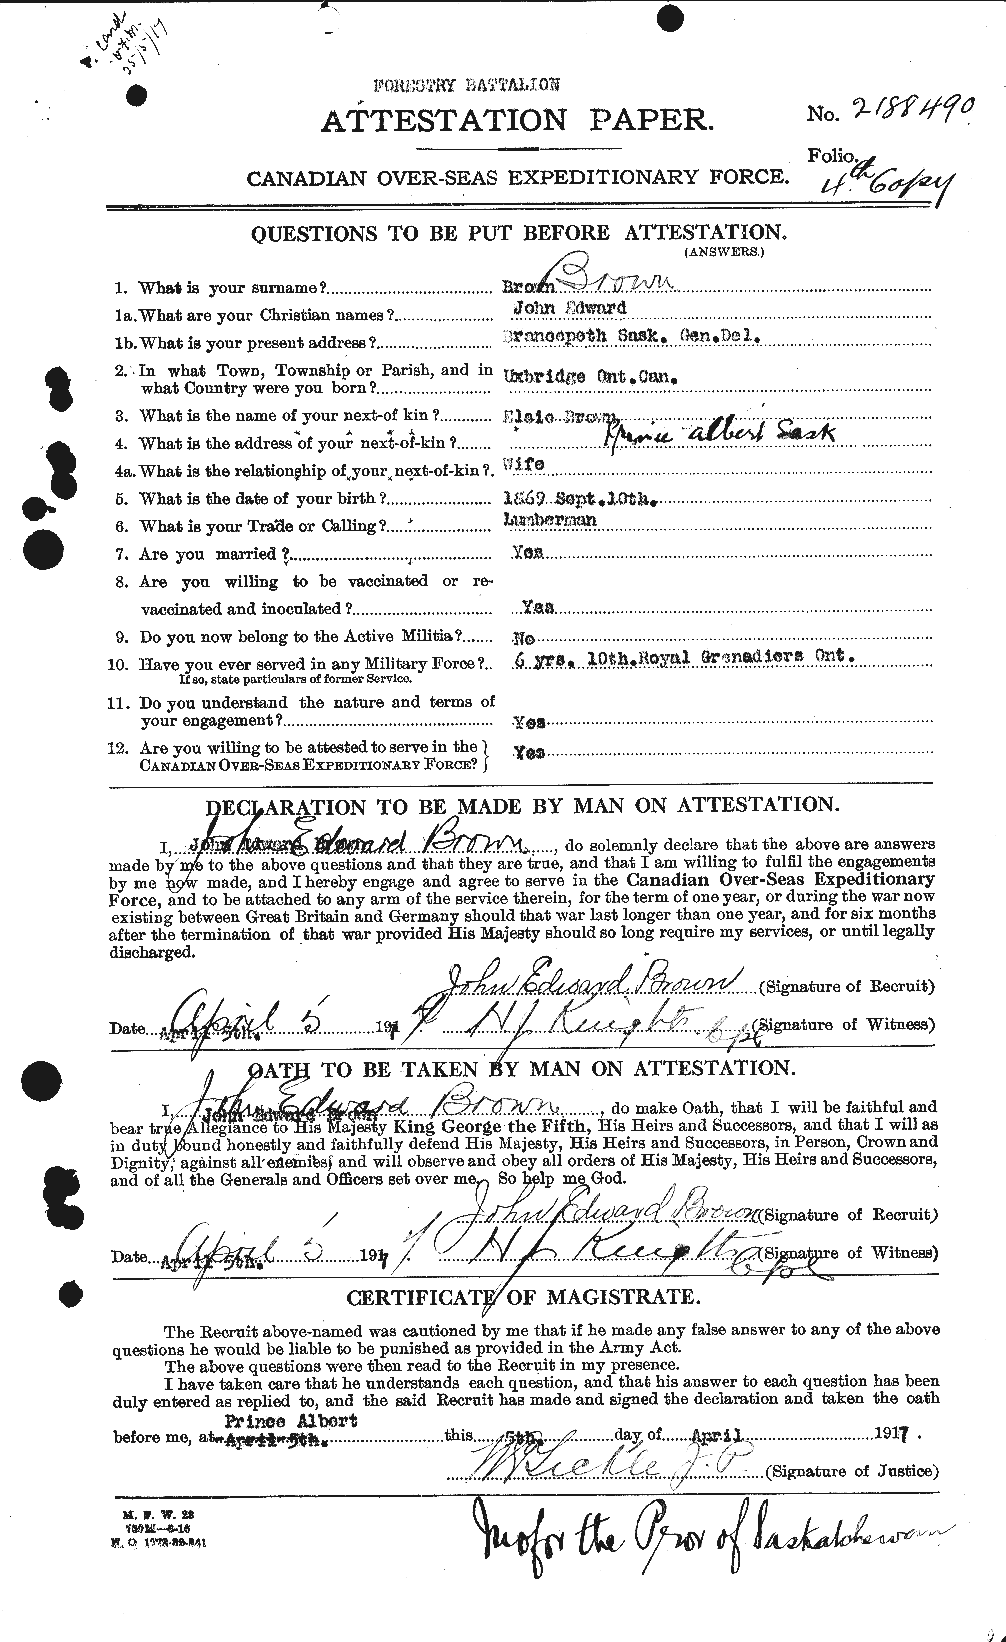 Personnel Records of the First World War - CEF 264589a